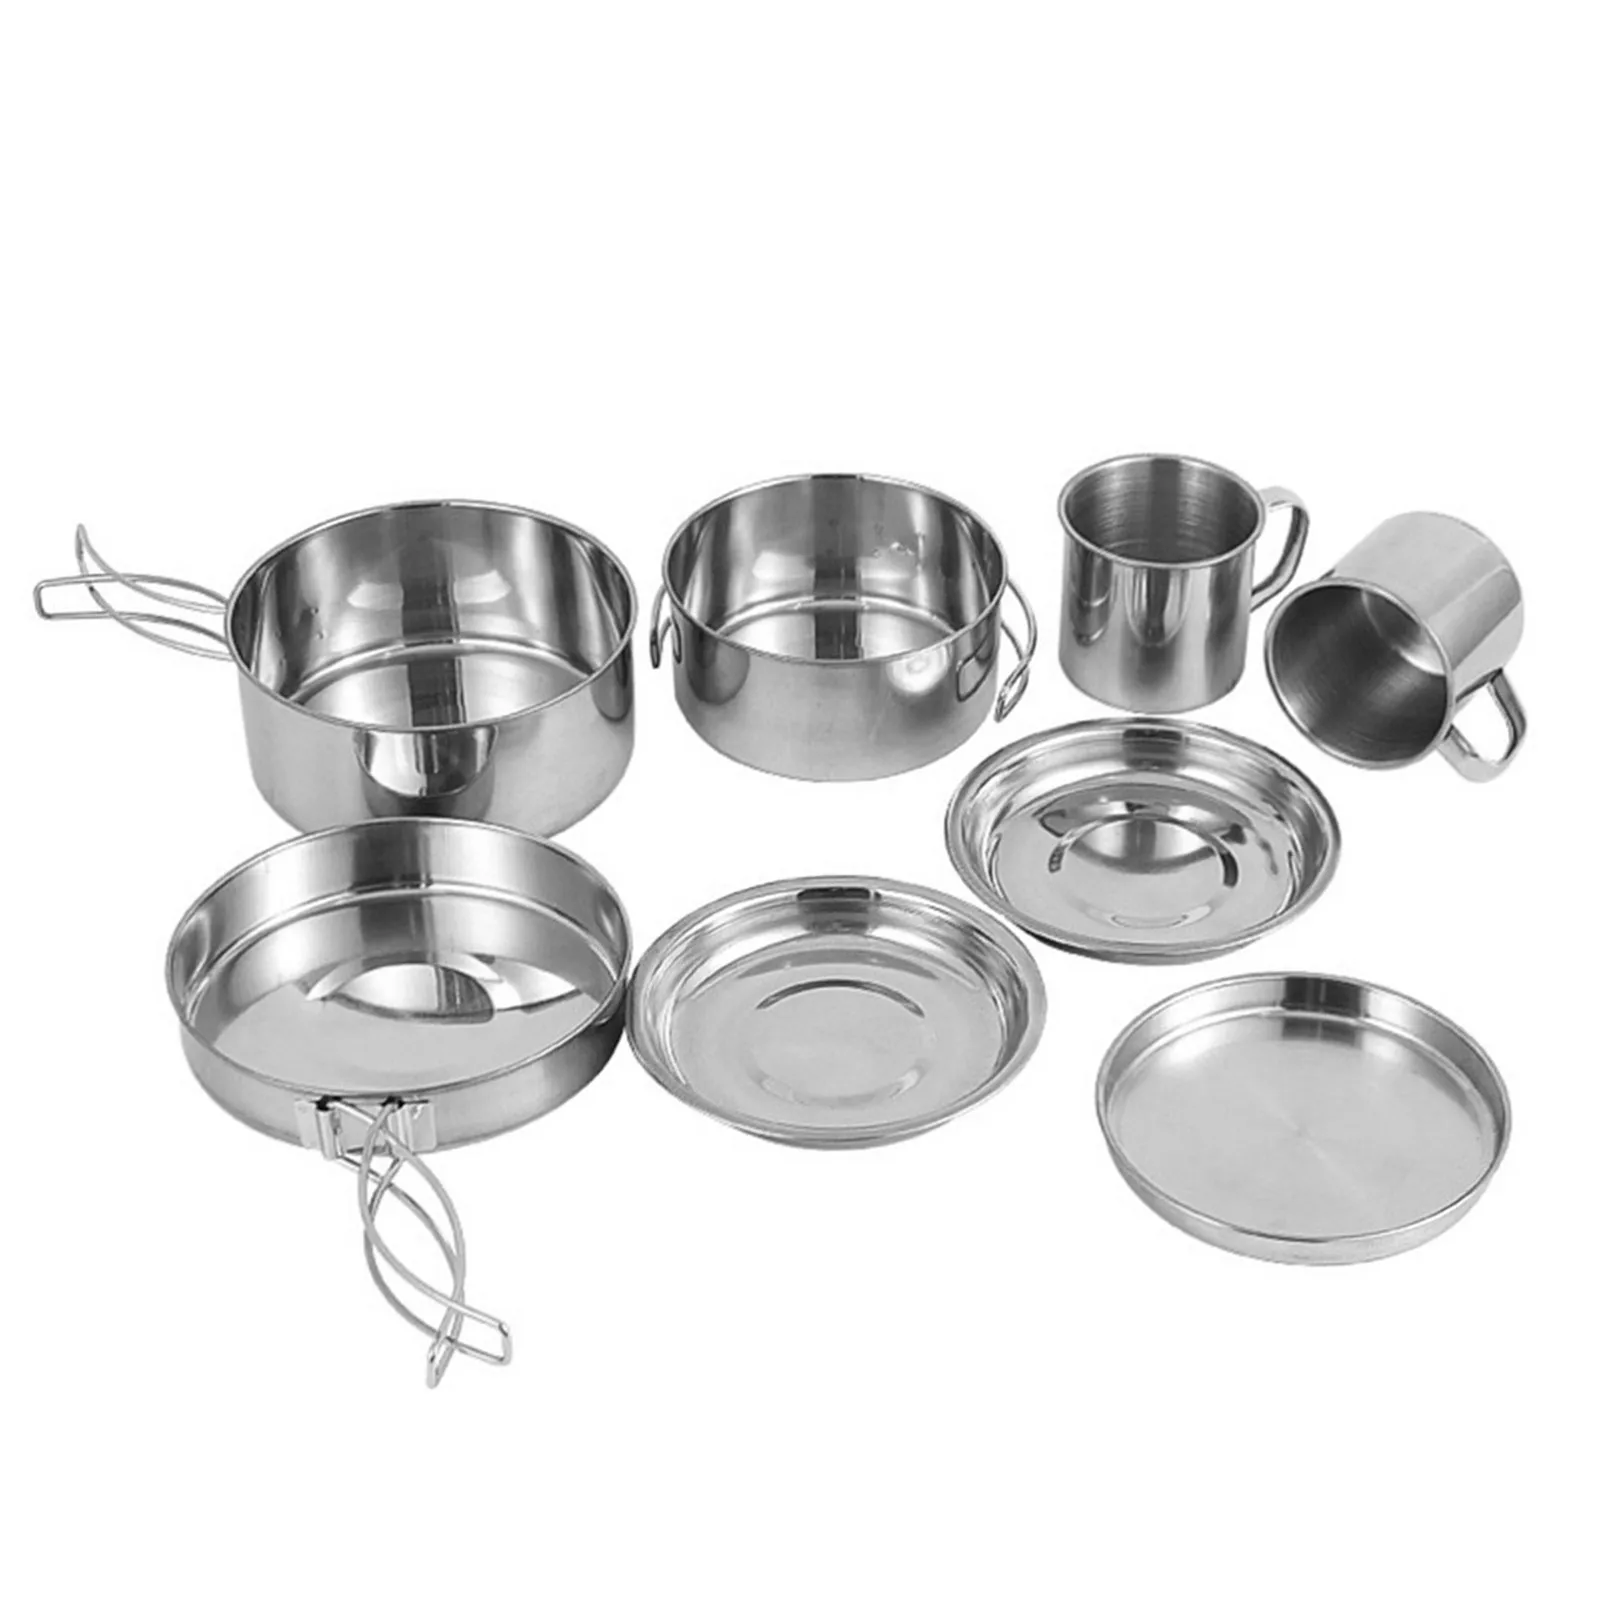 Stainless Steel Outdoor Cookware Frying Pan Pot Set Camping Cooking Silver 